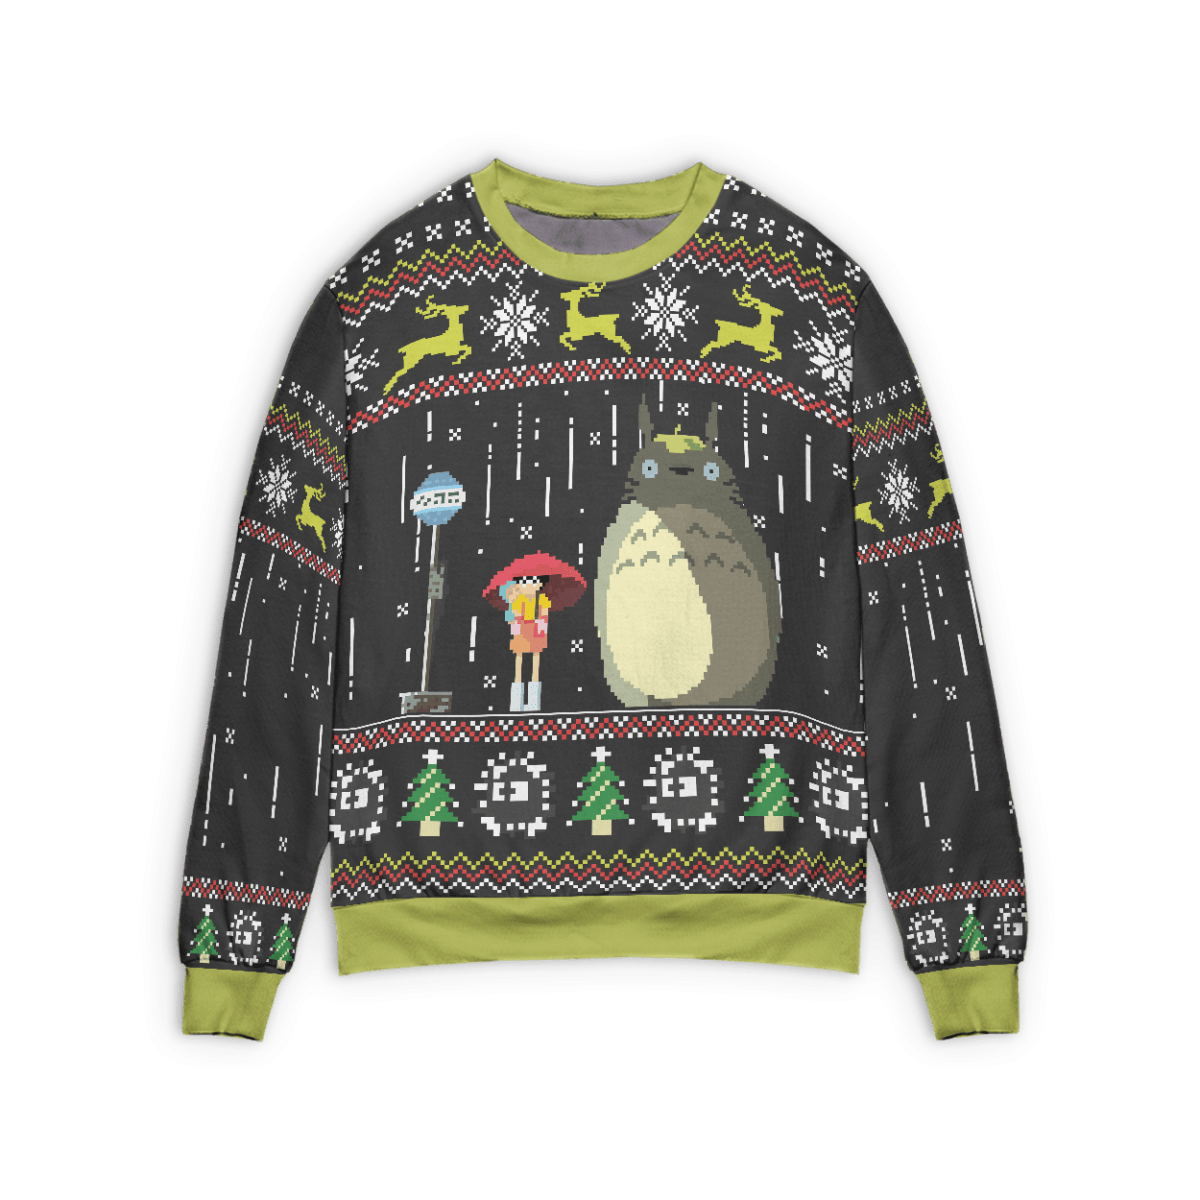 Totoro – The Ugly Christmas Sweater Style 2 Ghibli Store ghibli.store